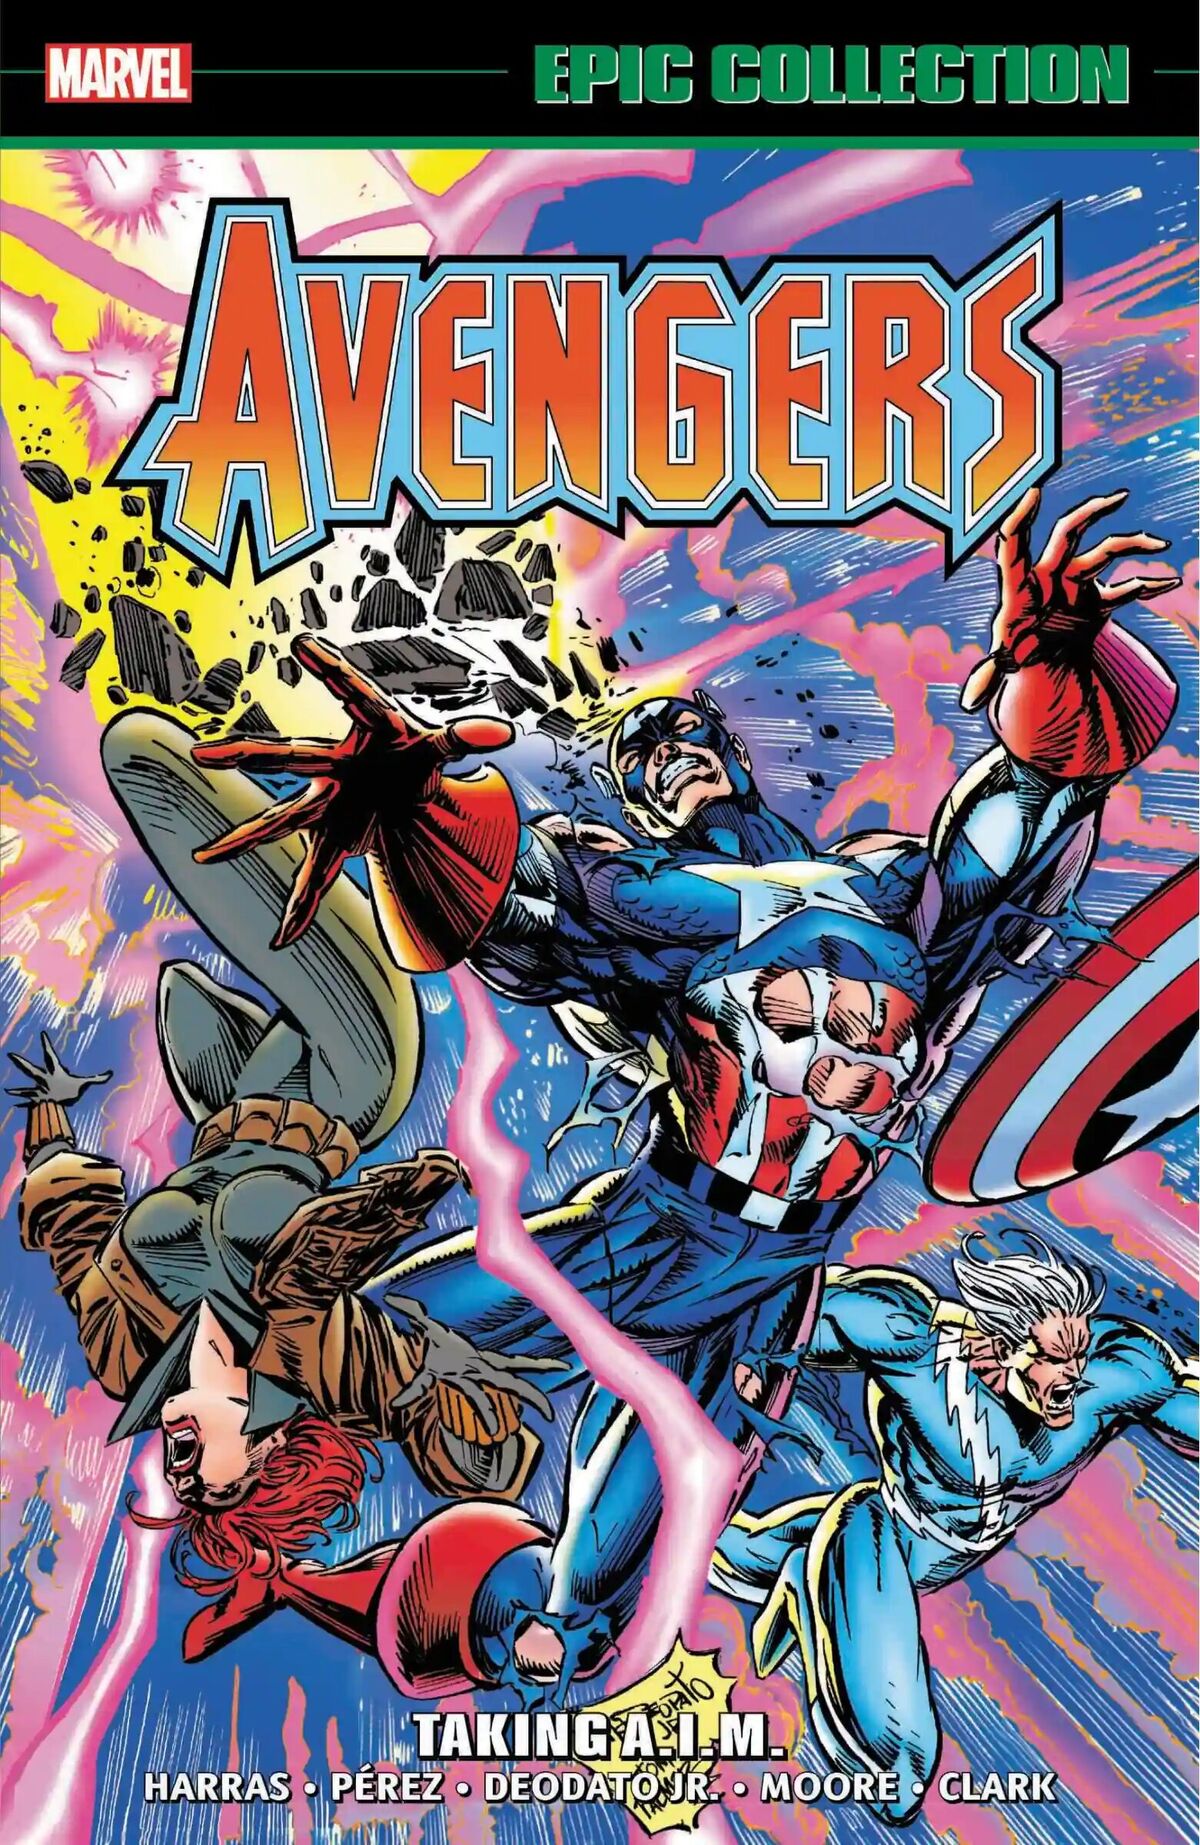 Epic Collection: Avengers Vol 1 3, Marvel Database